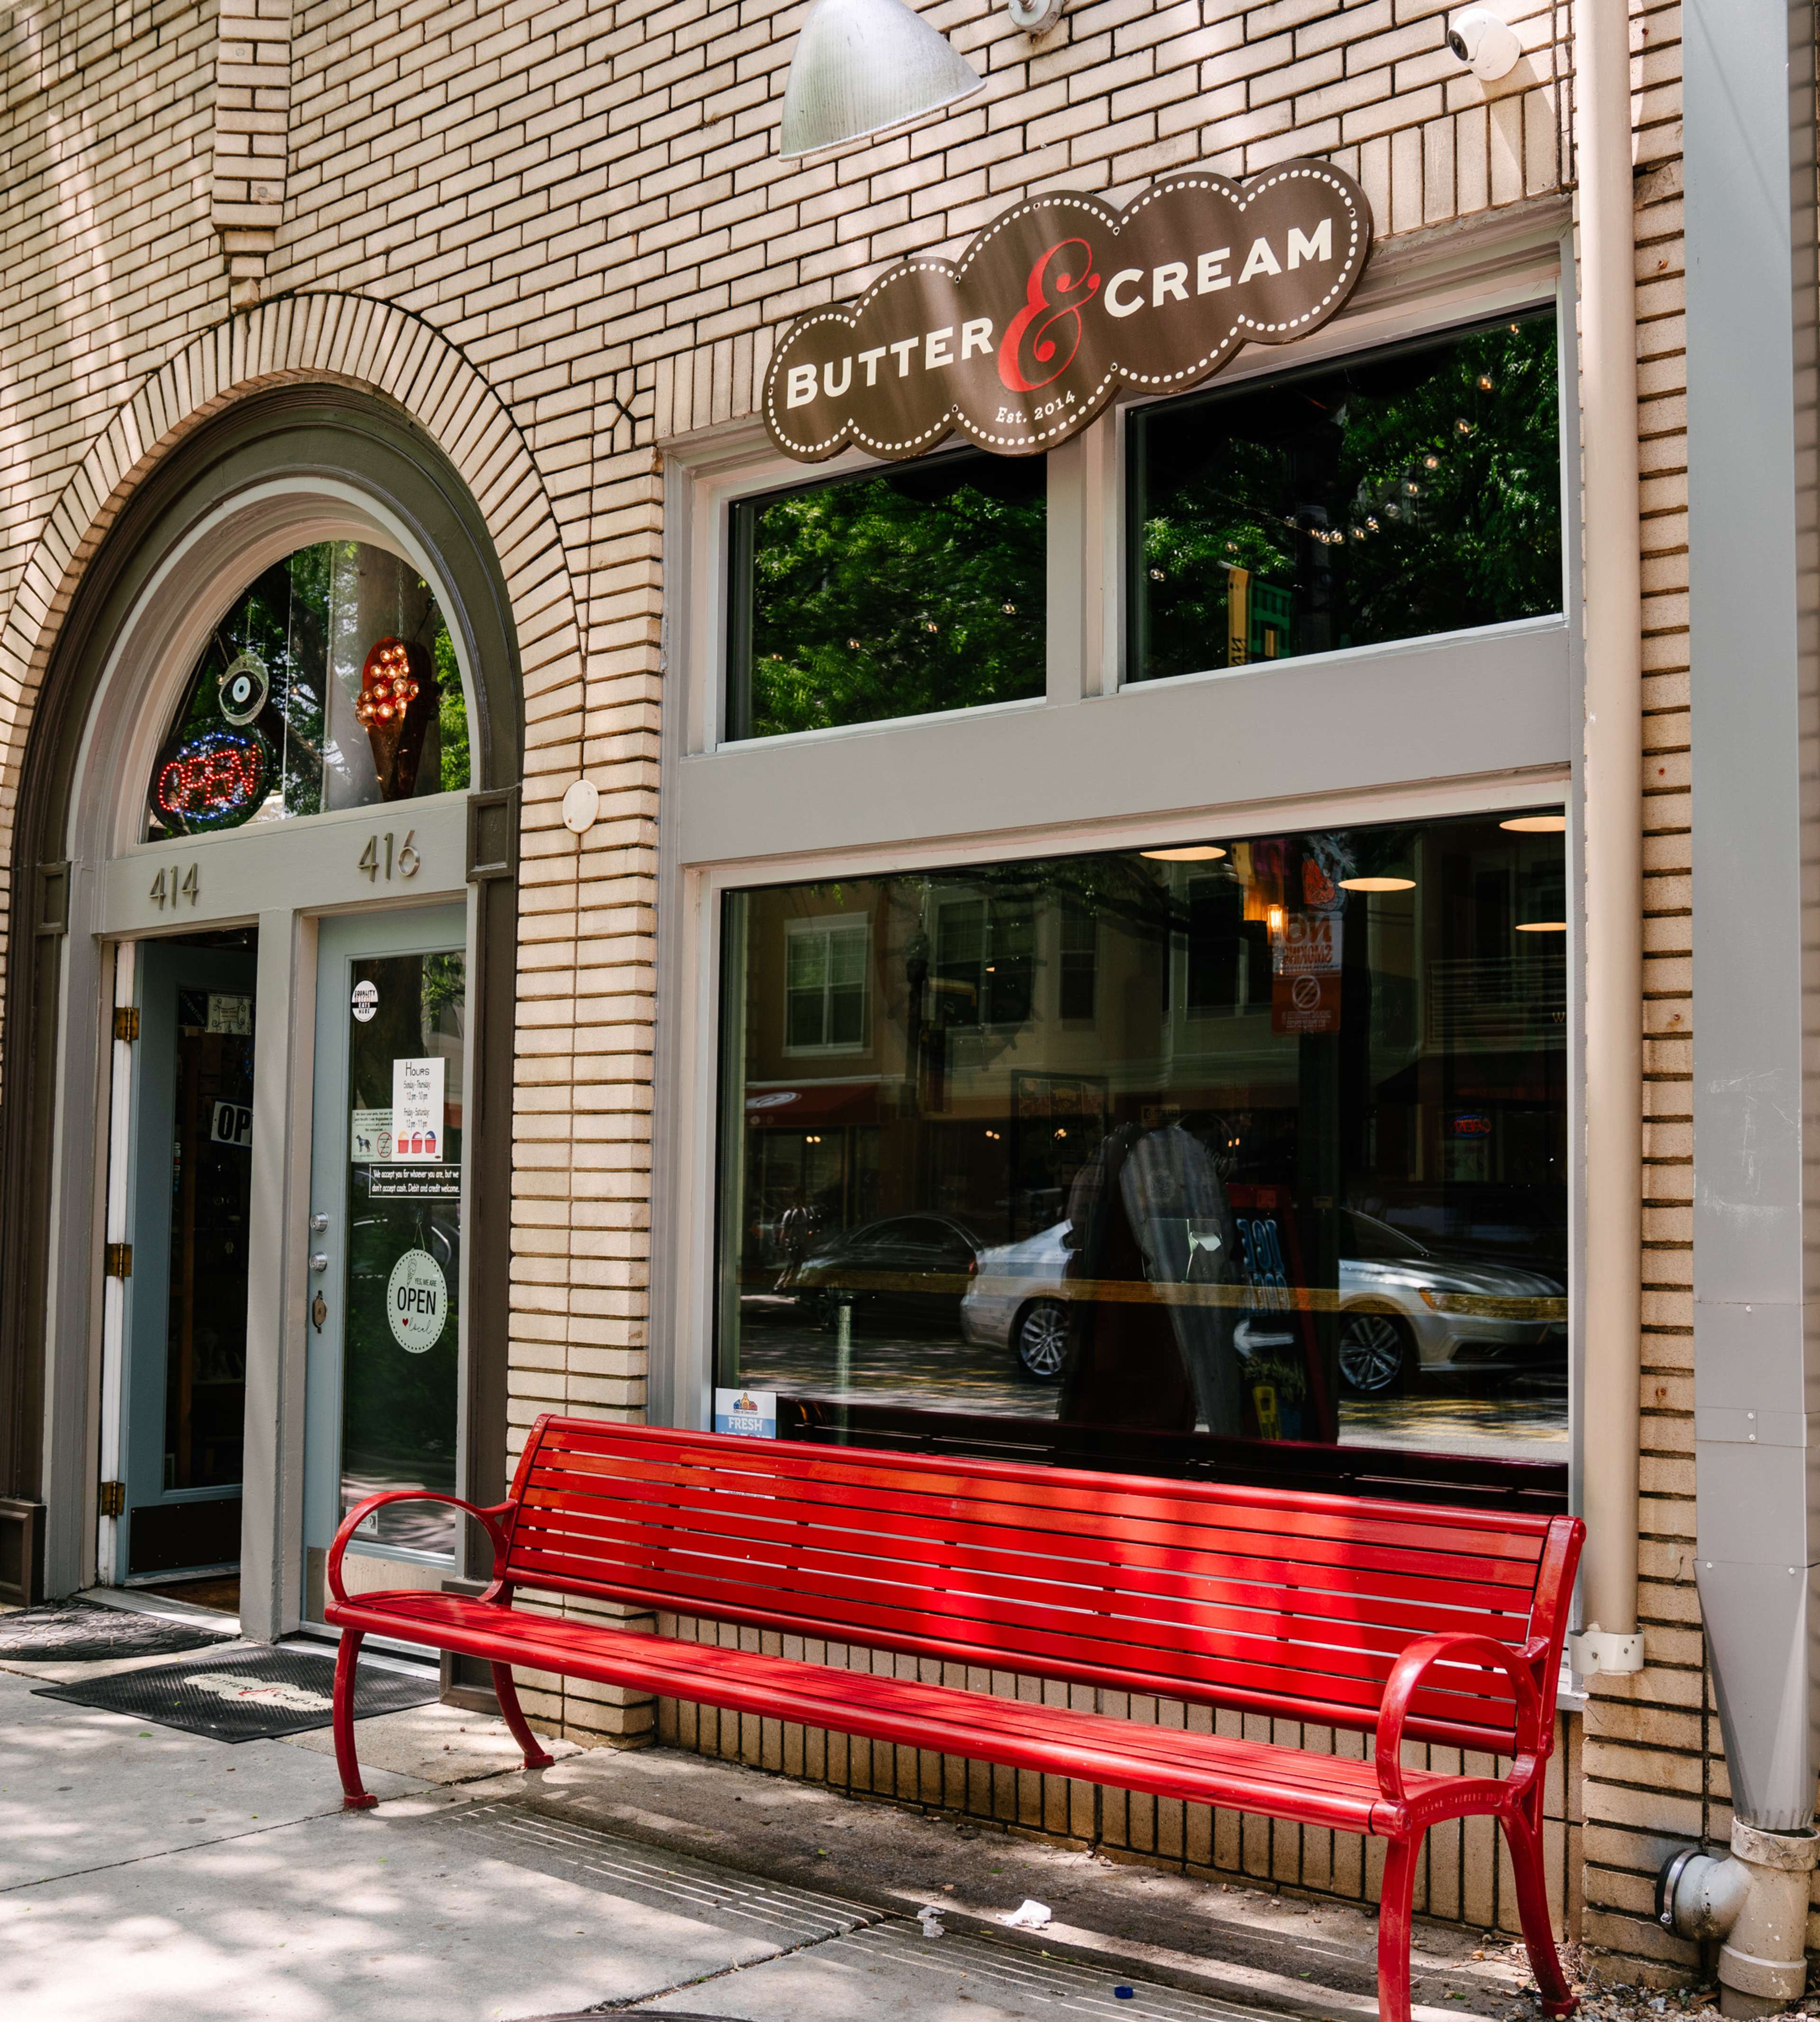 exterior of ice cream shop with red bench